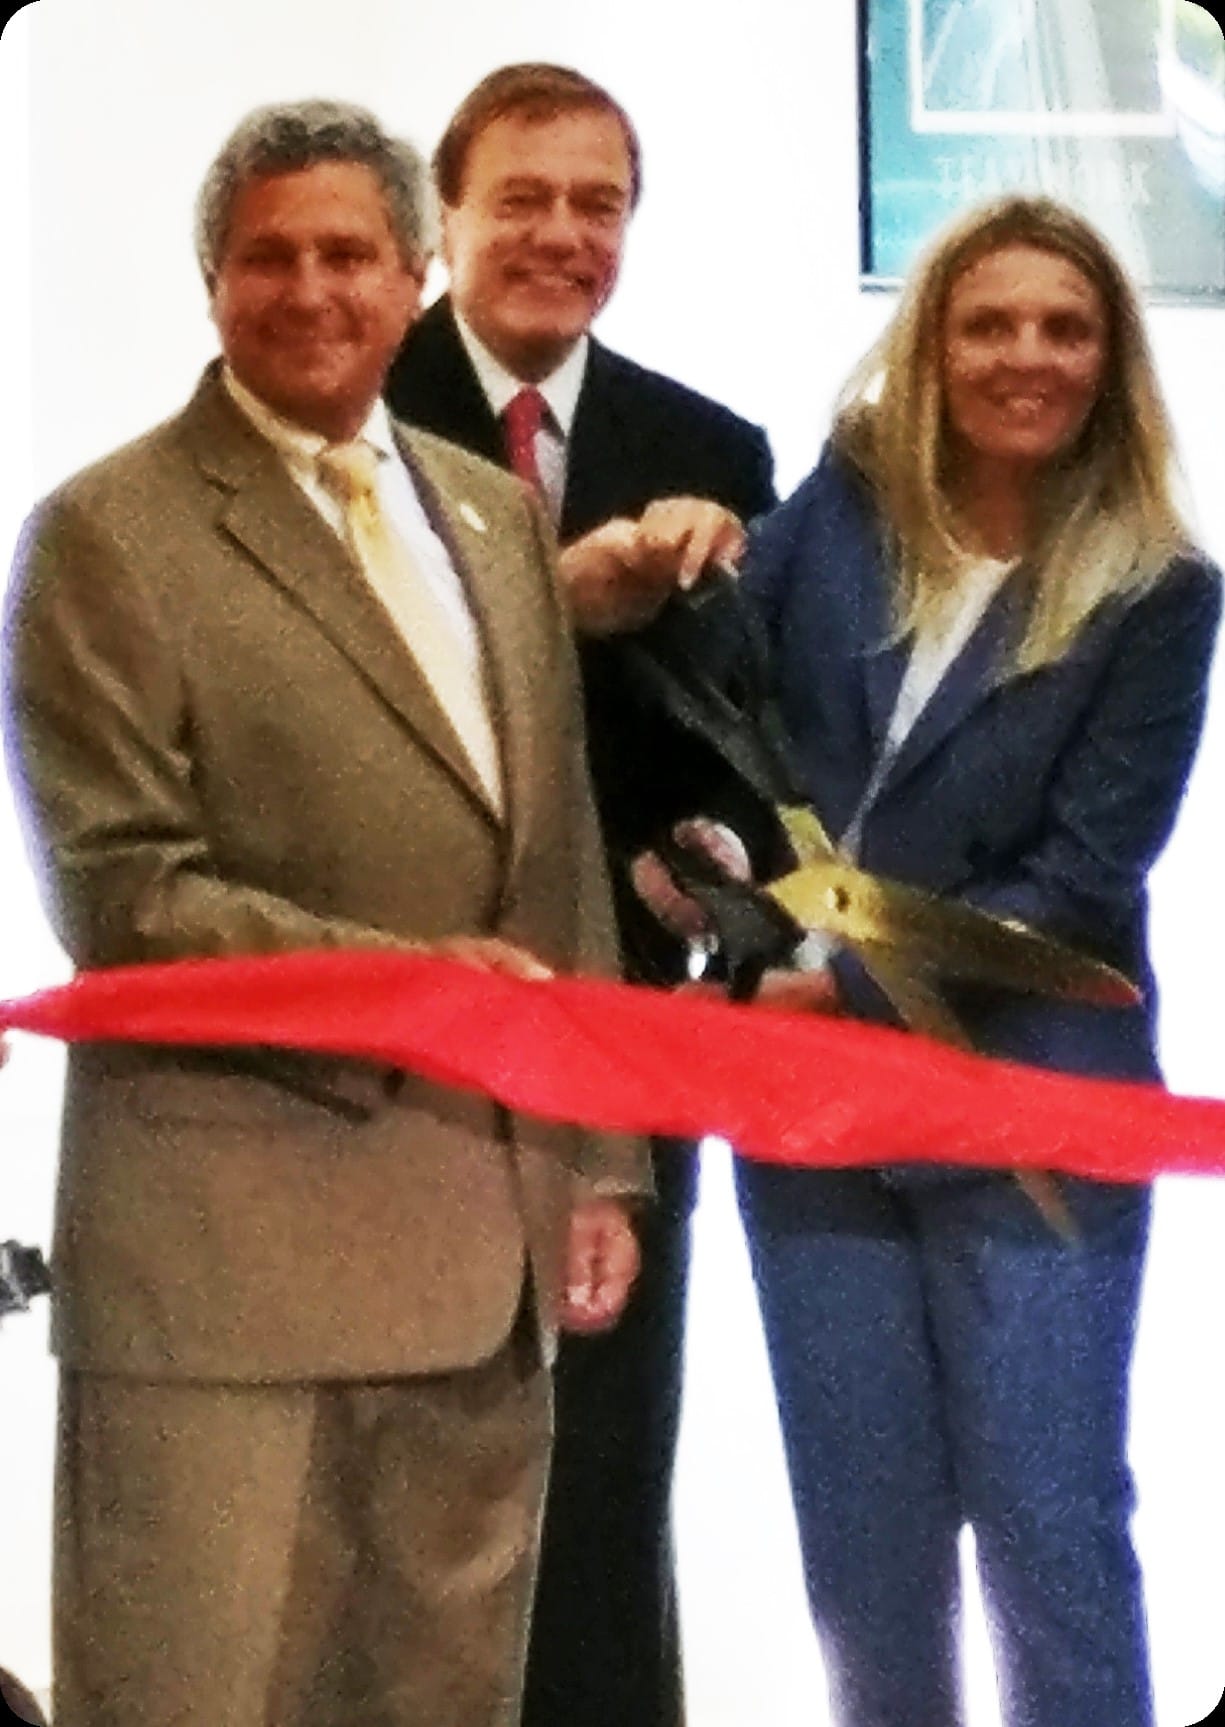 From left: Senator Christopher 'Kip' Bateman; Robert Stack, President and CEO of Community Options, Inc.; Svetlana Repic-Qira, Community Options, Inc. Regional Vice President of New Jersey.